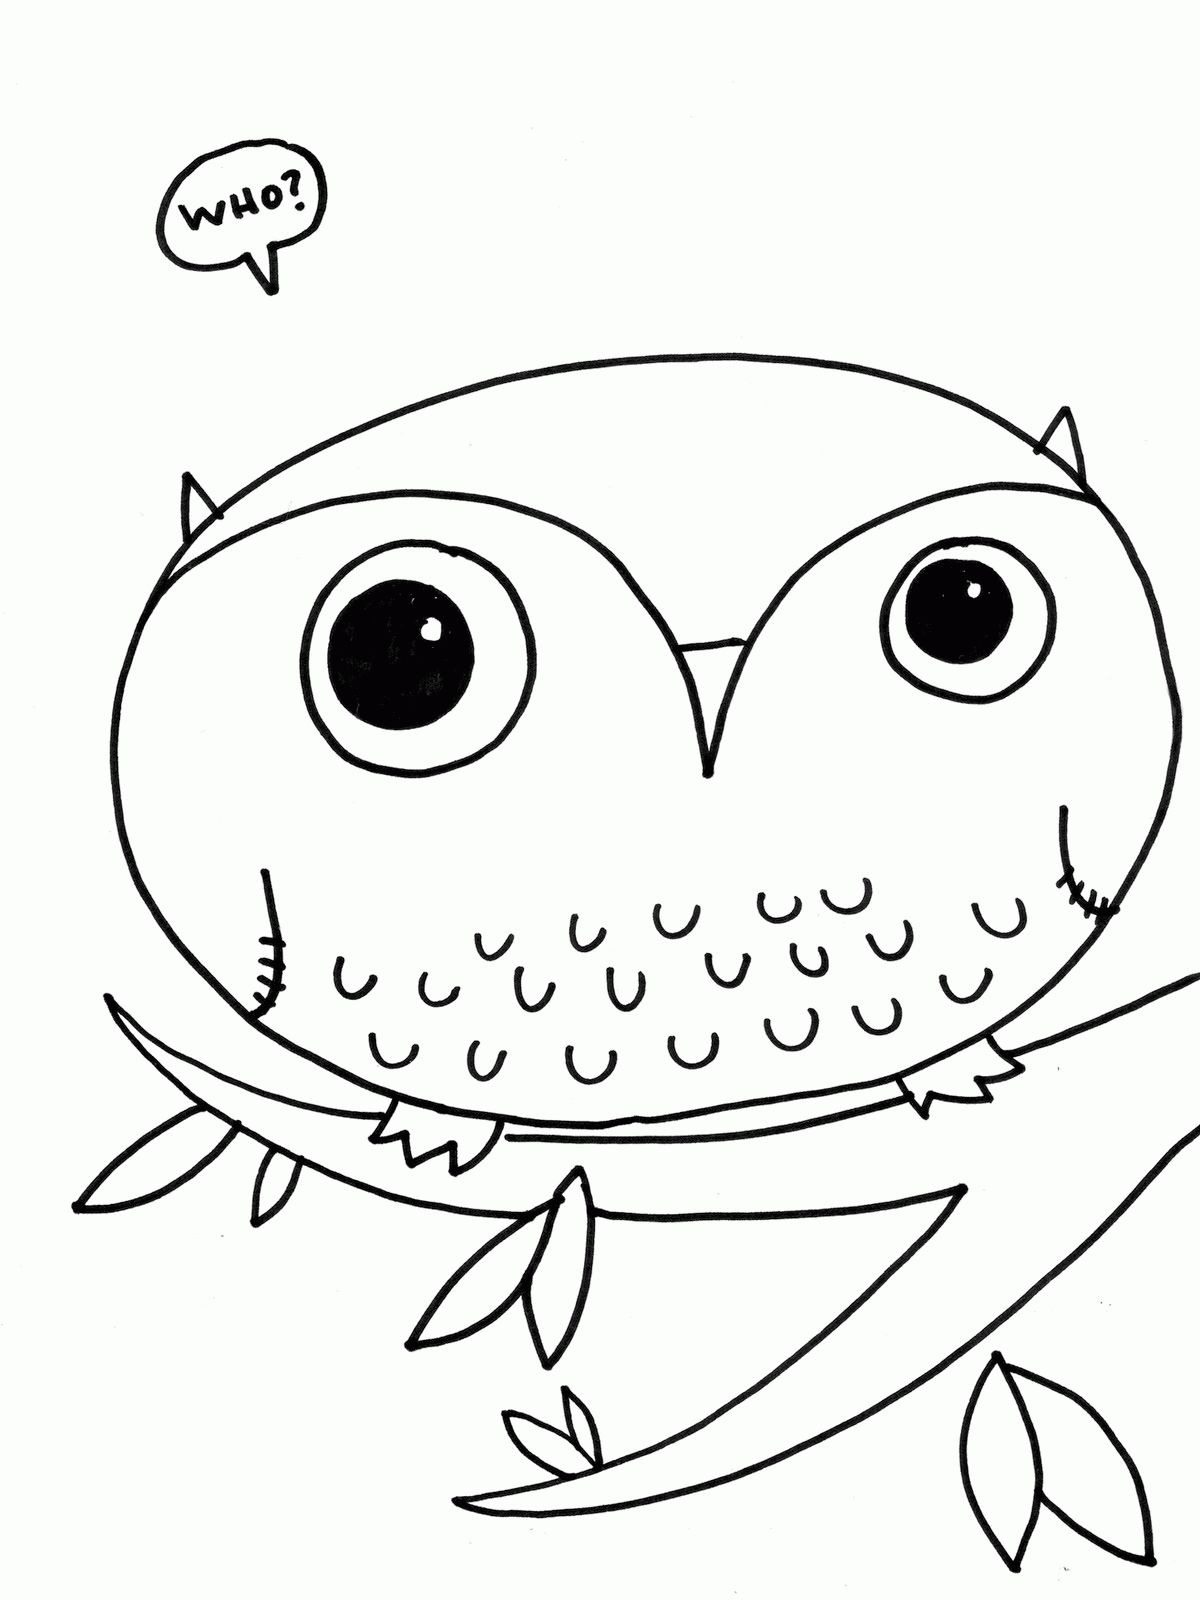 Owls Coloring Pages For S - High Quality Coloring Pages